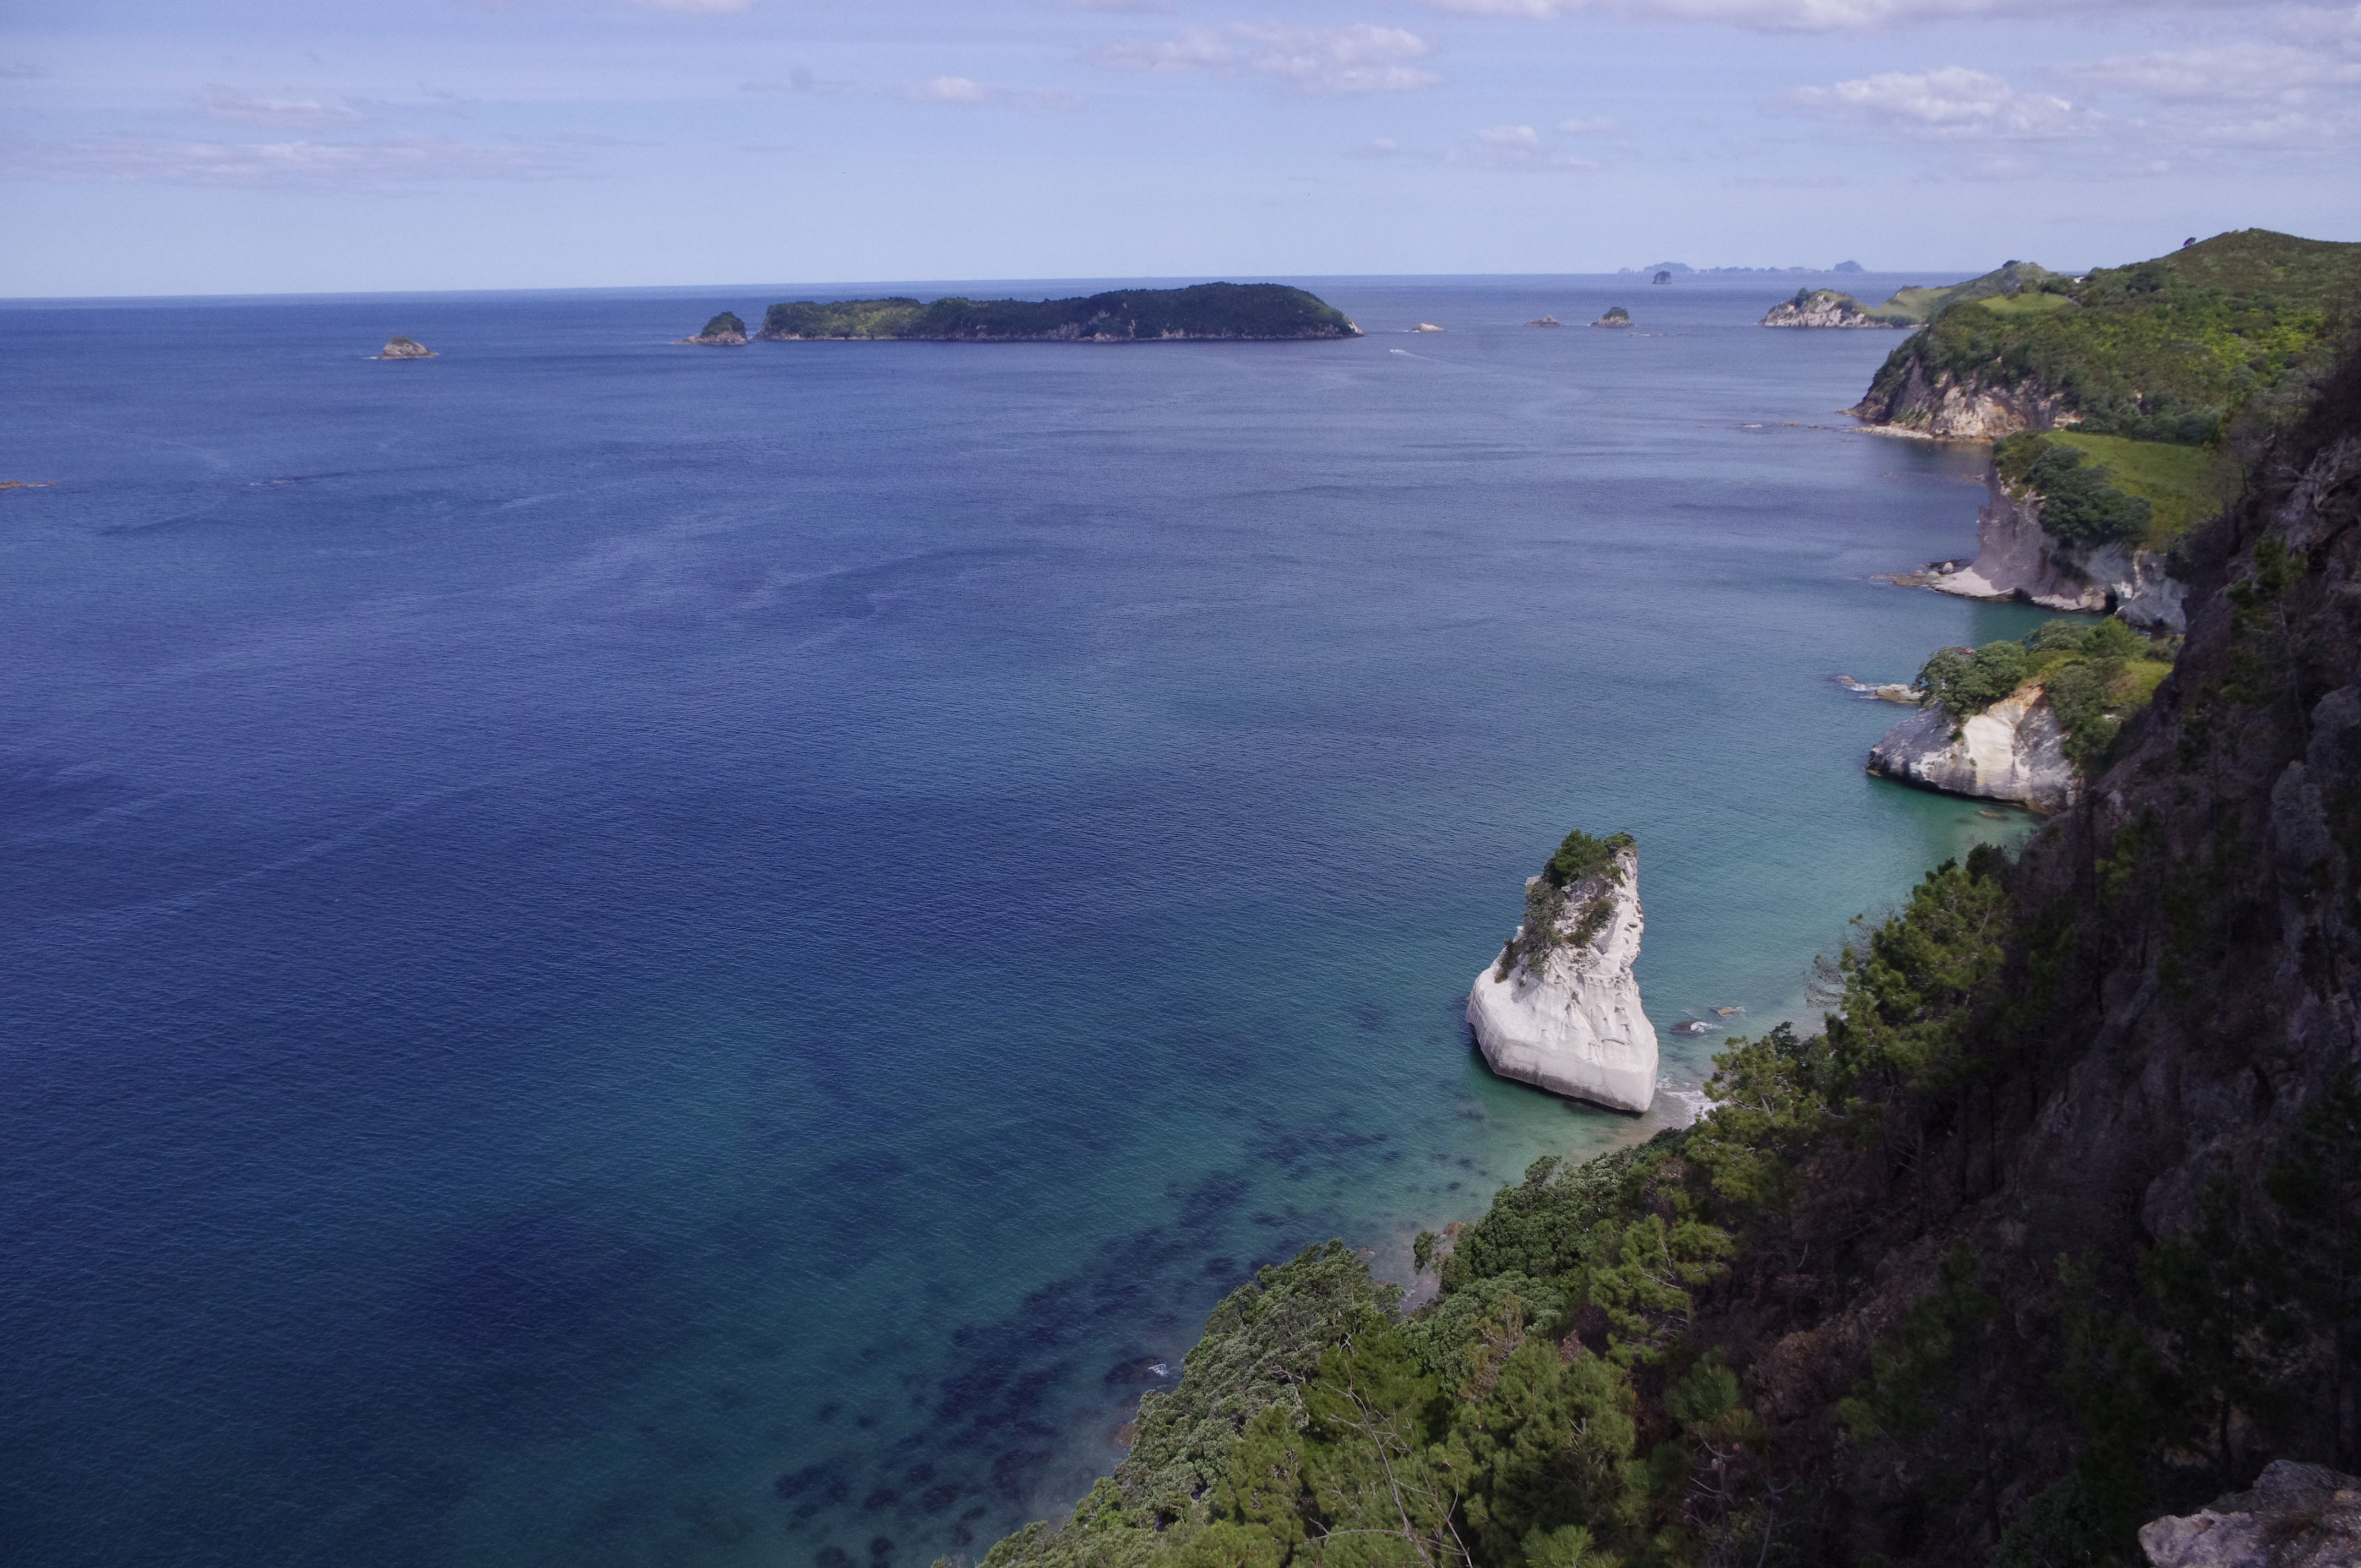 Walk in Coromandel, Hahei and Cathedral Cove